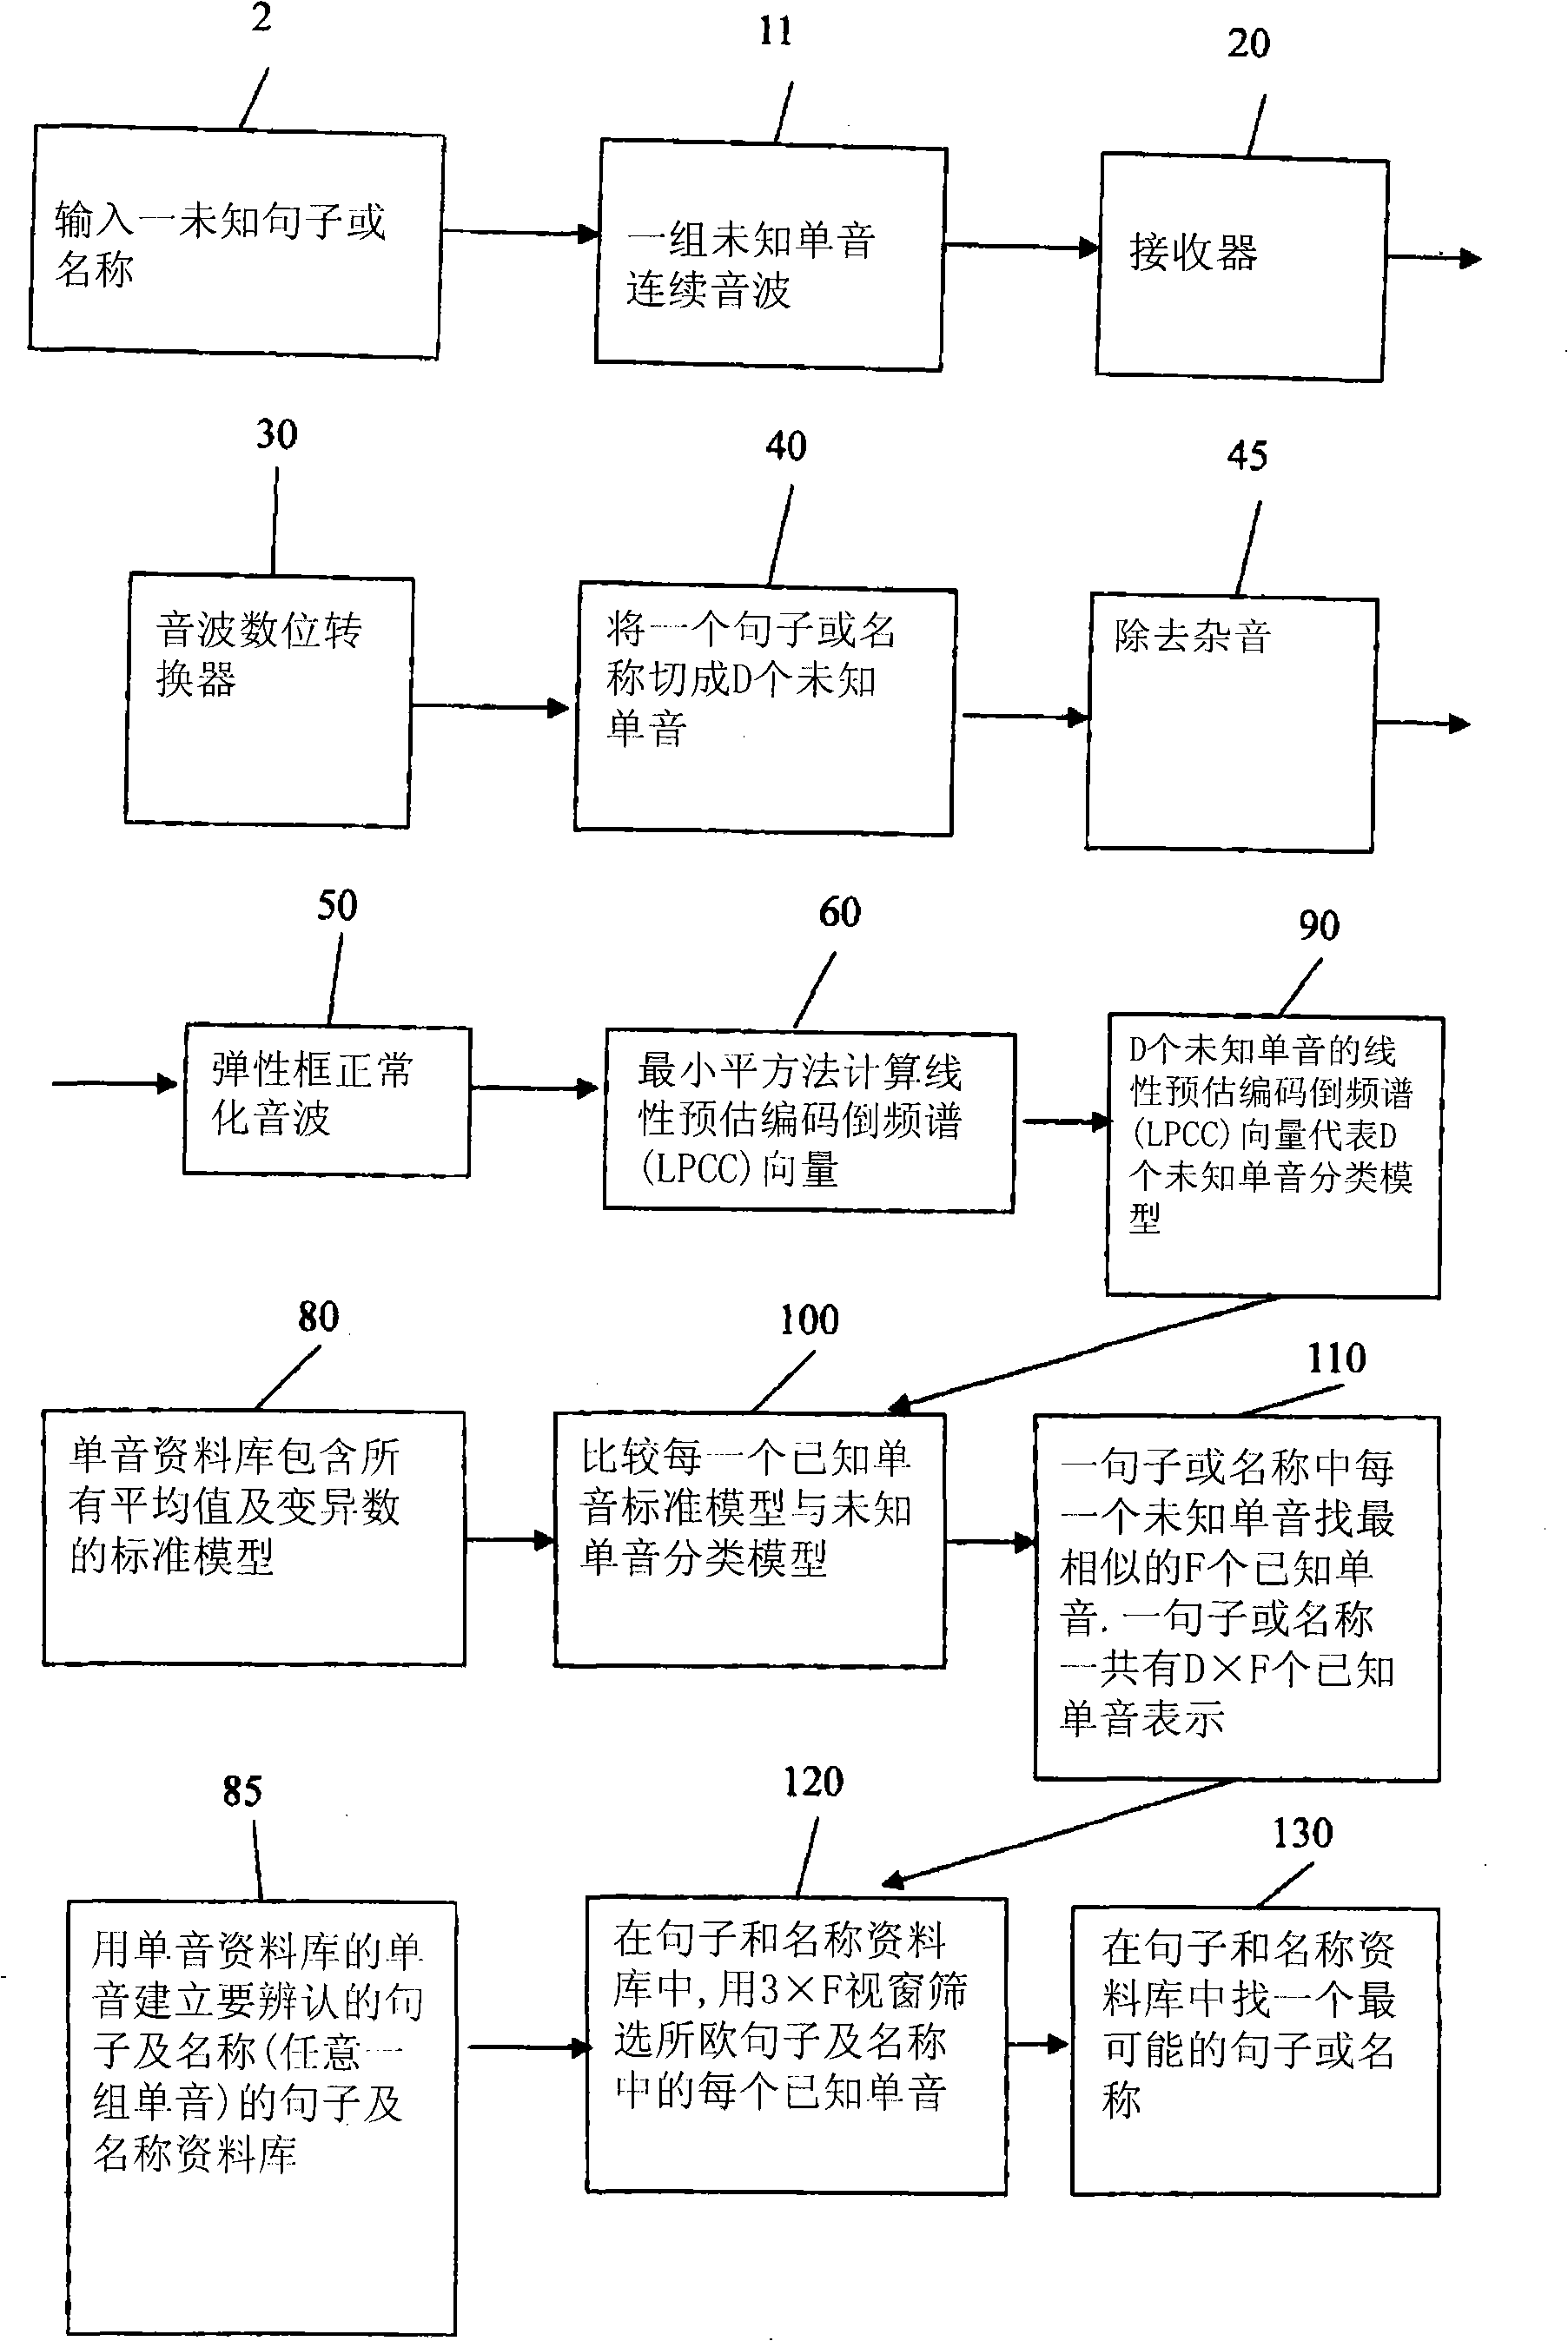 Method for identifying national language single tone and sentence with a hundred percent identification rate